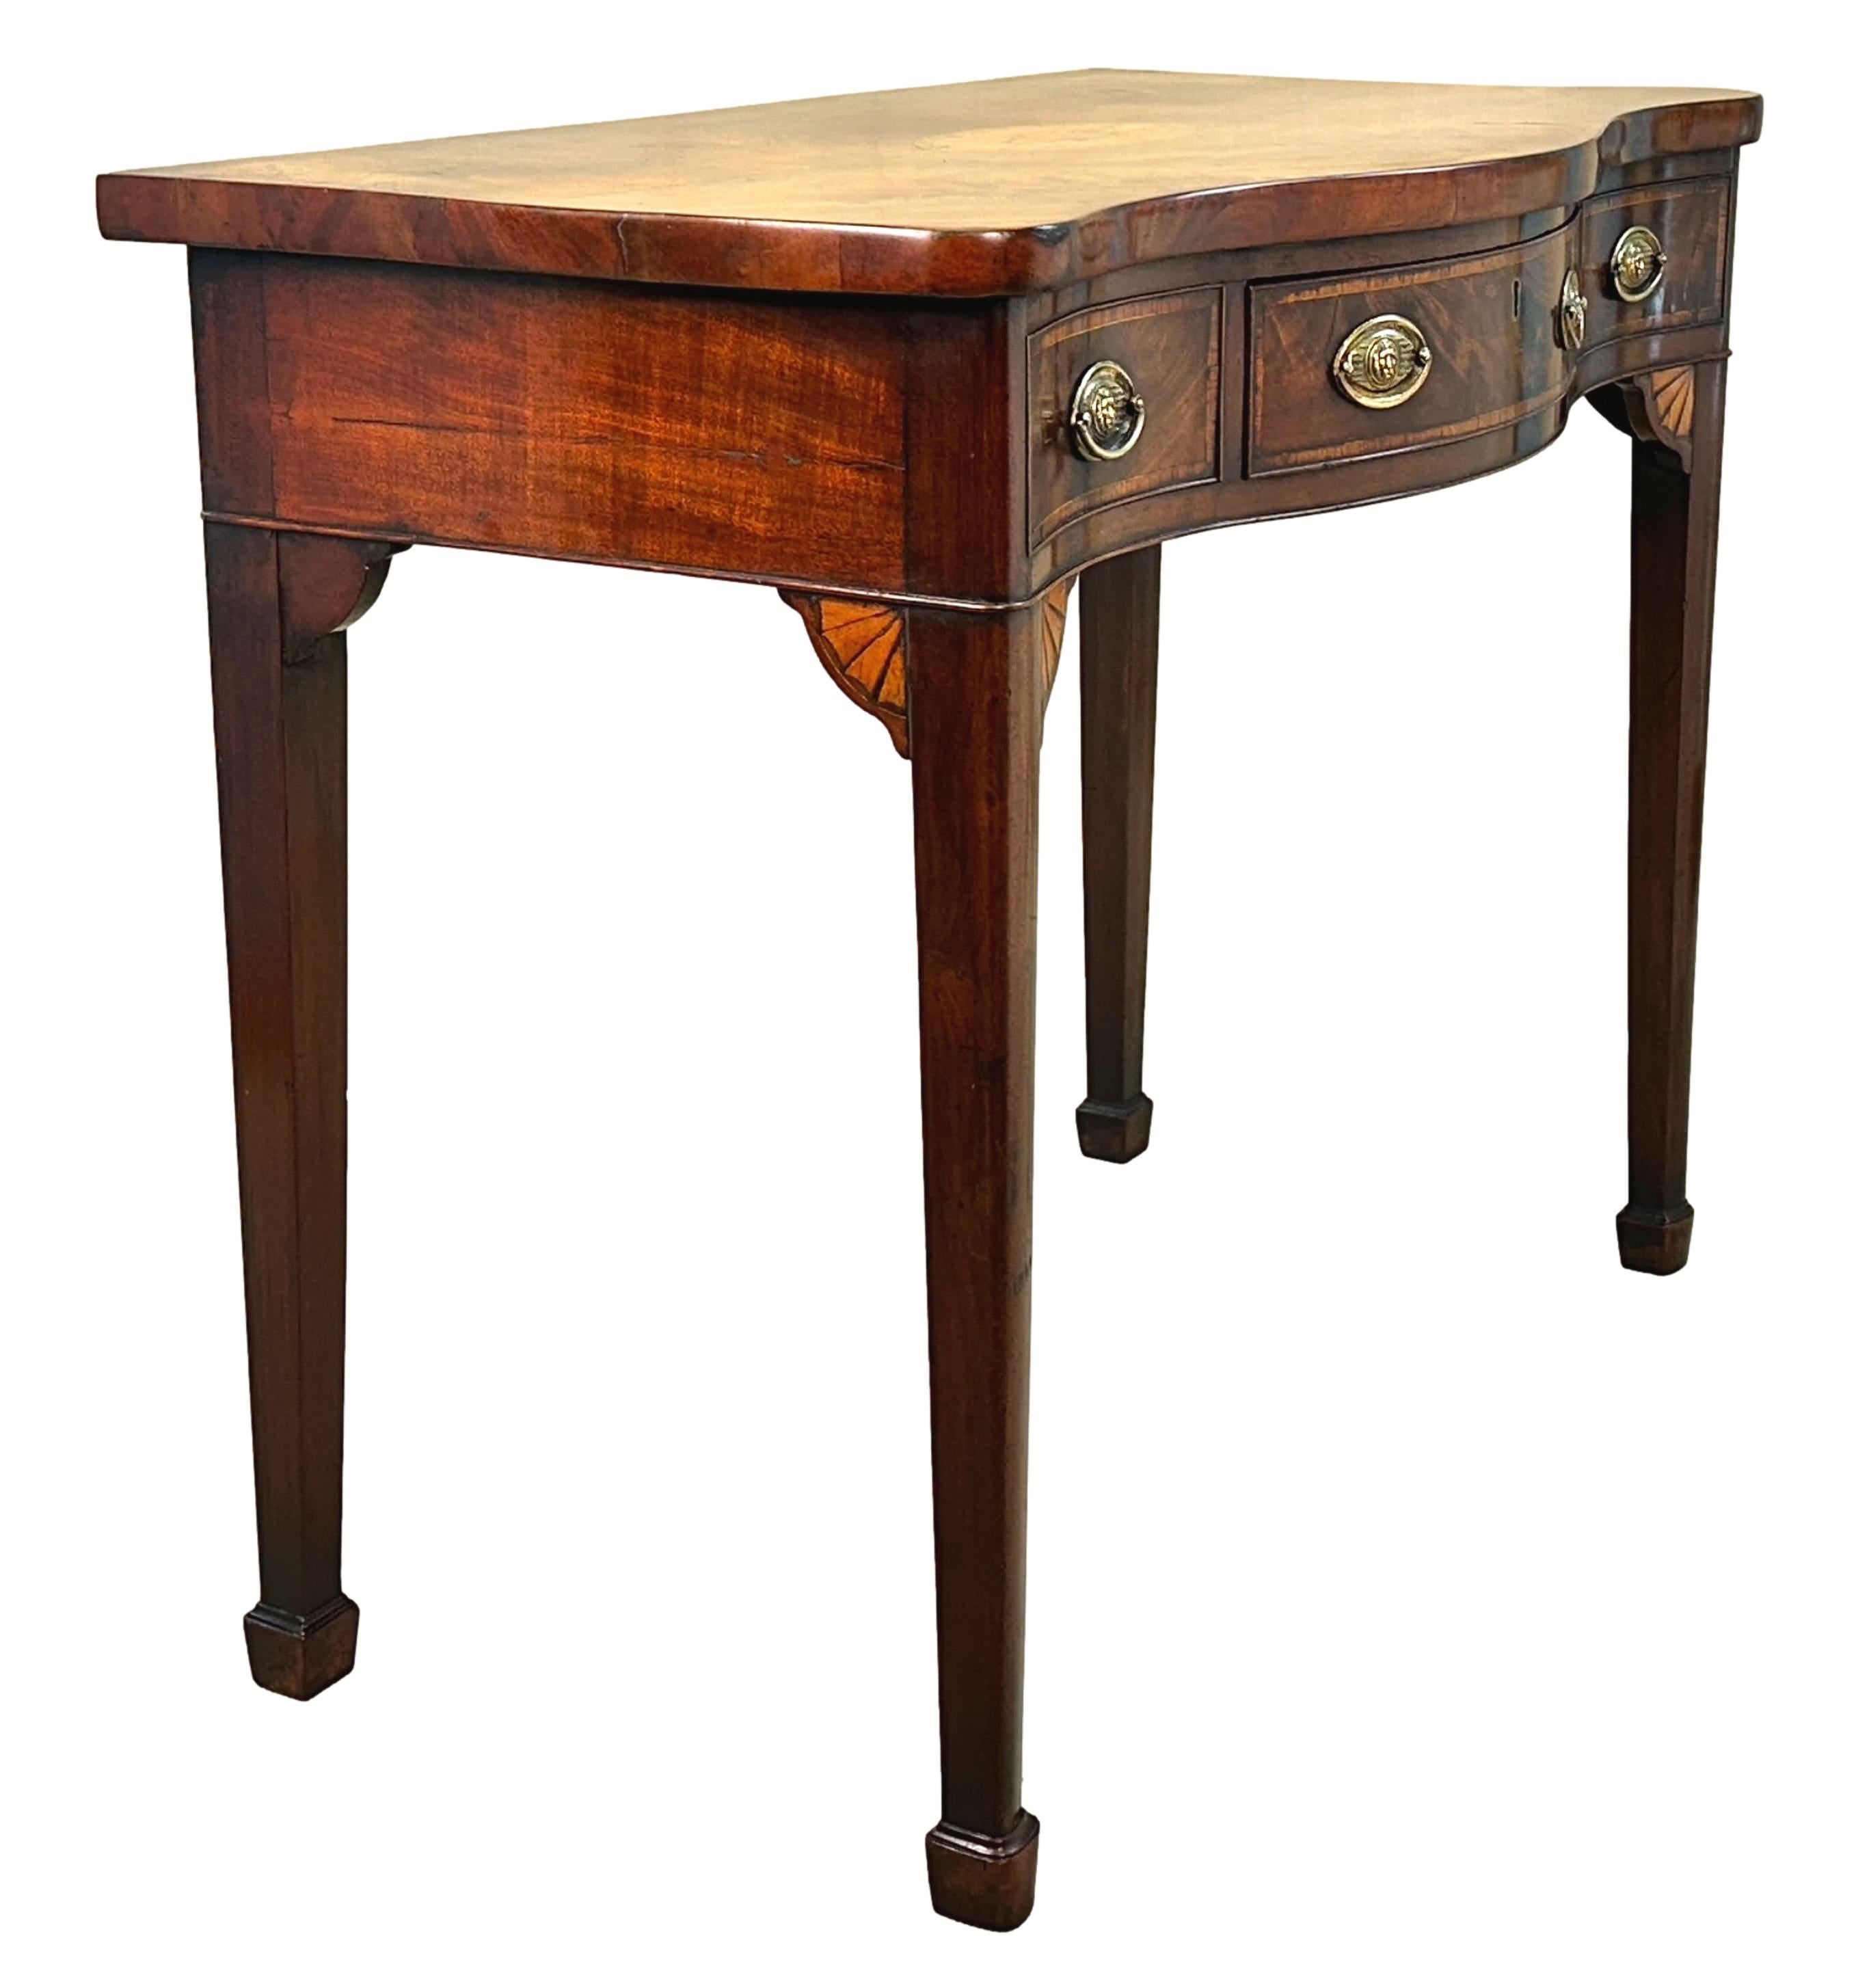 A Stunning 18th Century Georgian Mahogany Serving Table, Of Diminutive Proportions And Attractive Serpentine Form, Retaining Exceptional Rich Untouched Colour And Patina Throughout, Having Superbly Figured And Unusually Segmented Top With Central